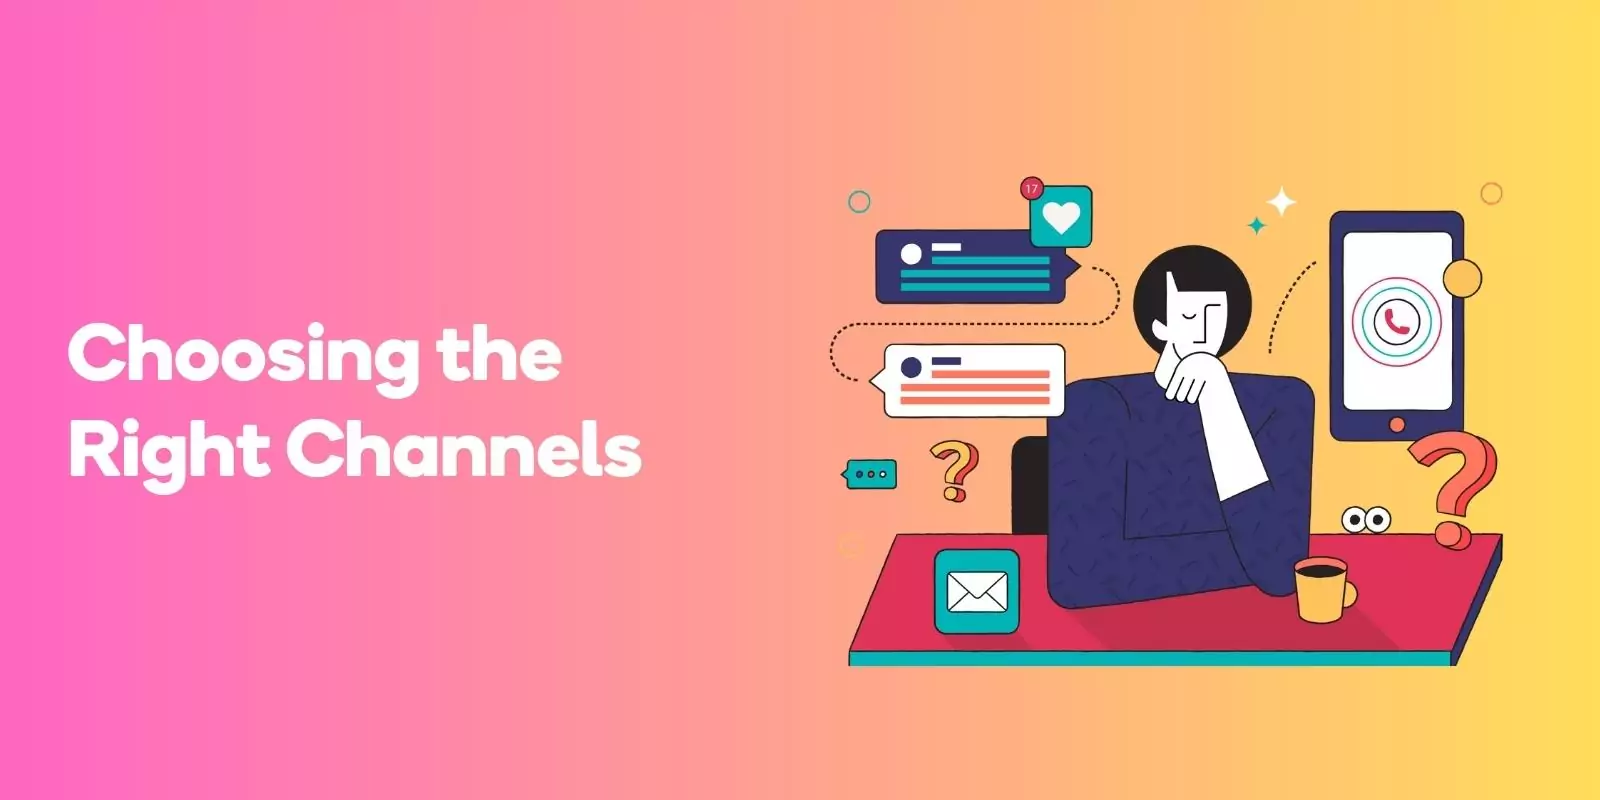 Choosing the Right Channels